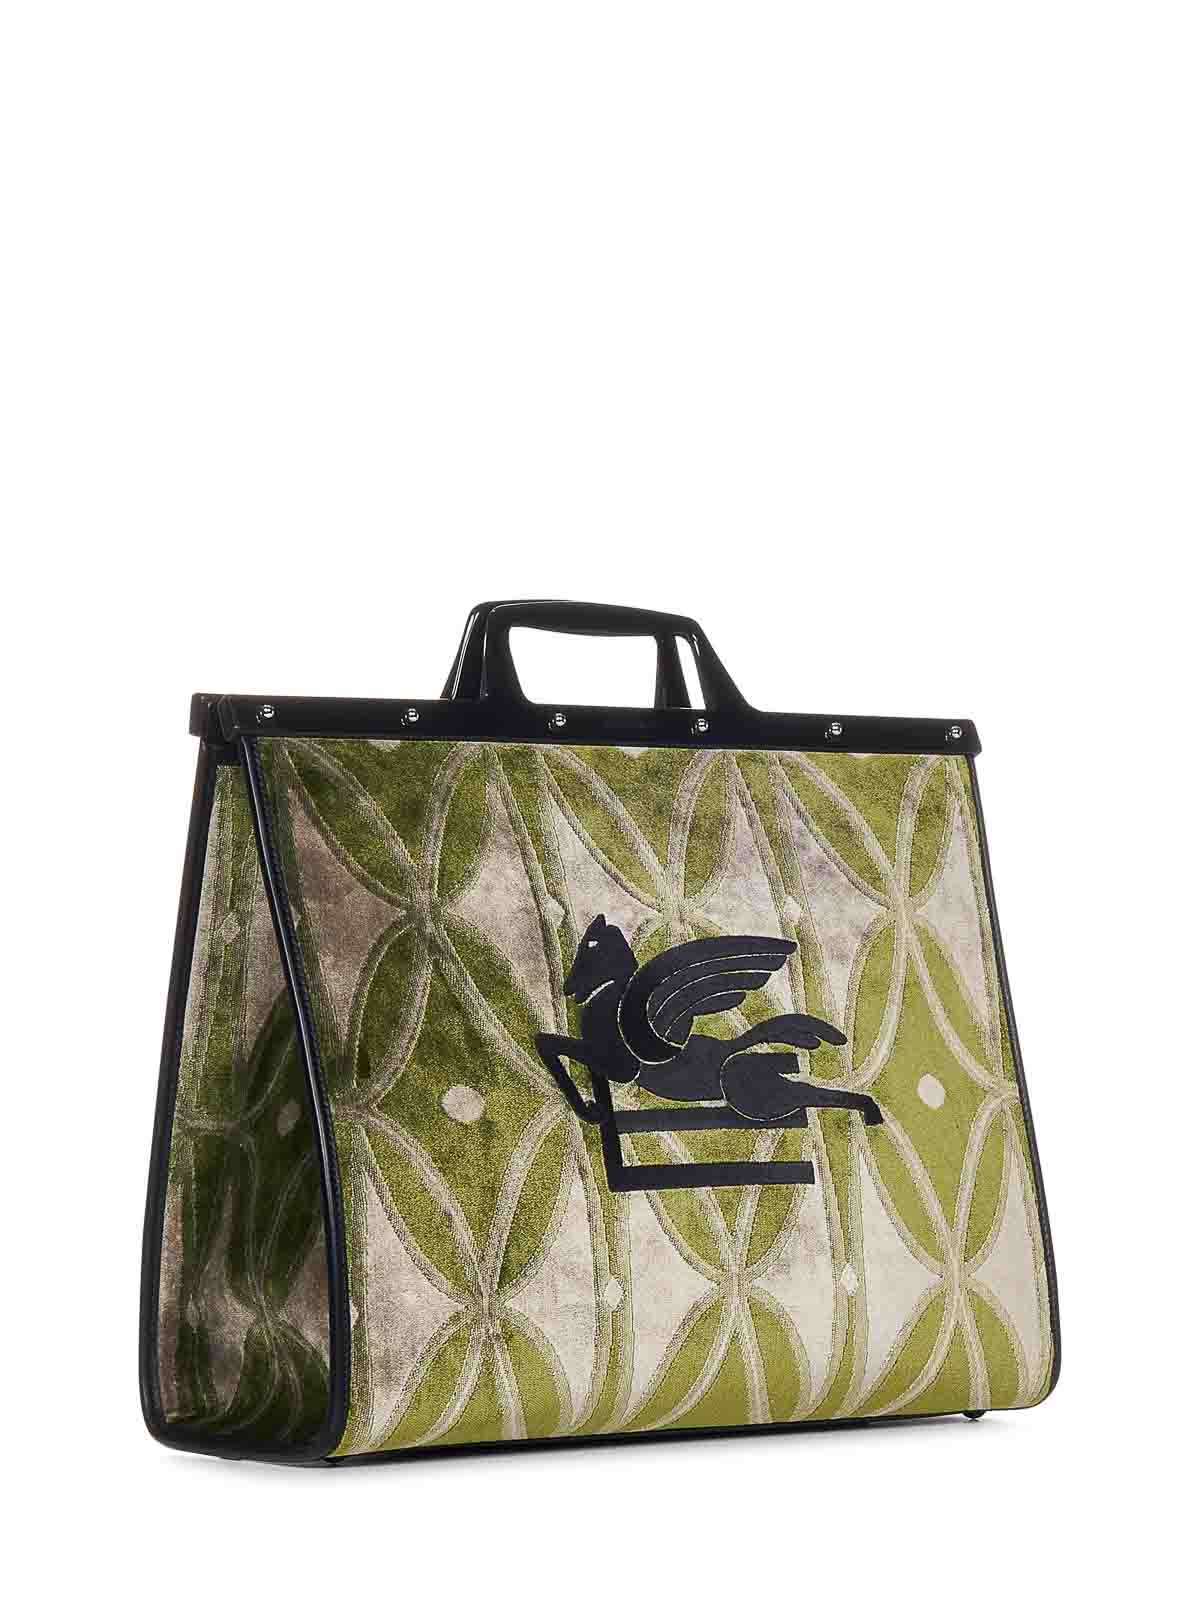 Totes bags Etro - Tote - 1P0247151502 | Shop online at THEBS [iKRIX]